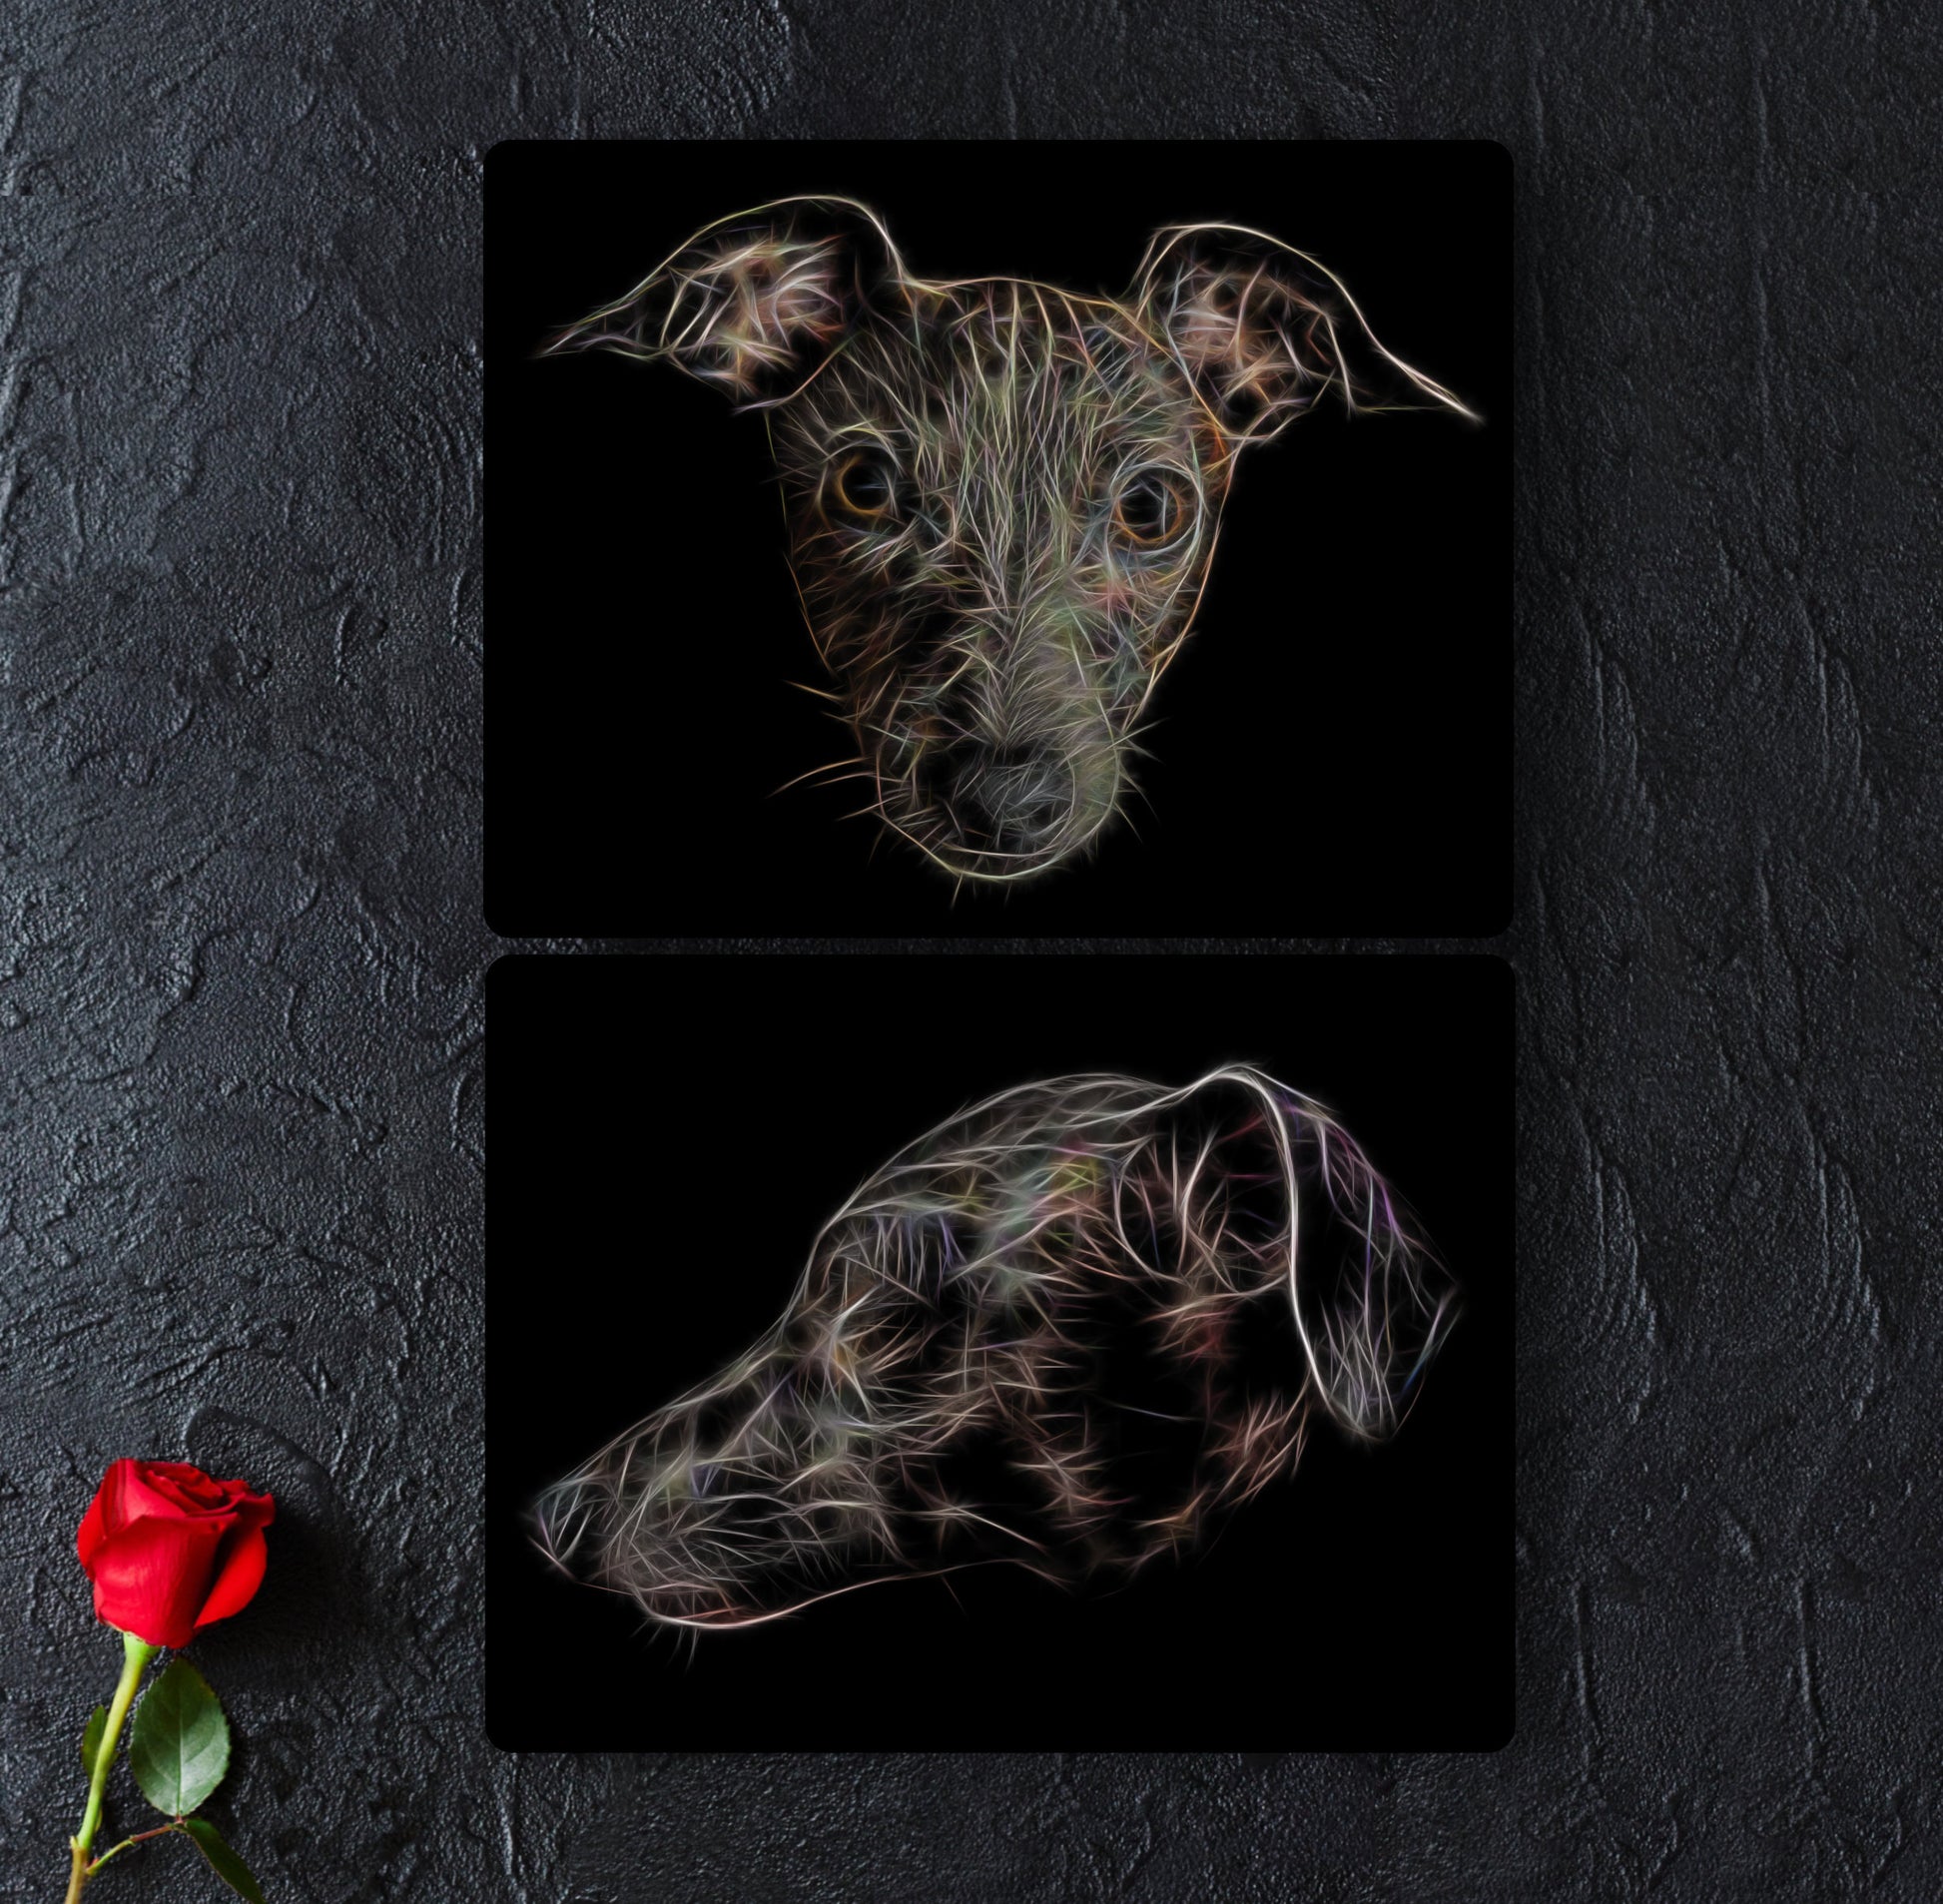 Italian Greyhound Metal Wall Plaque with Fractal Art Design,  Perfect Dog Owner Gift.